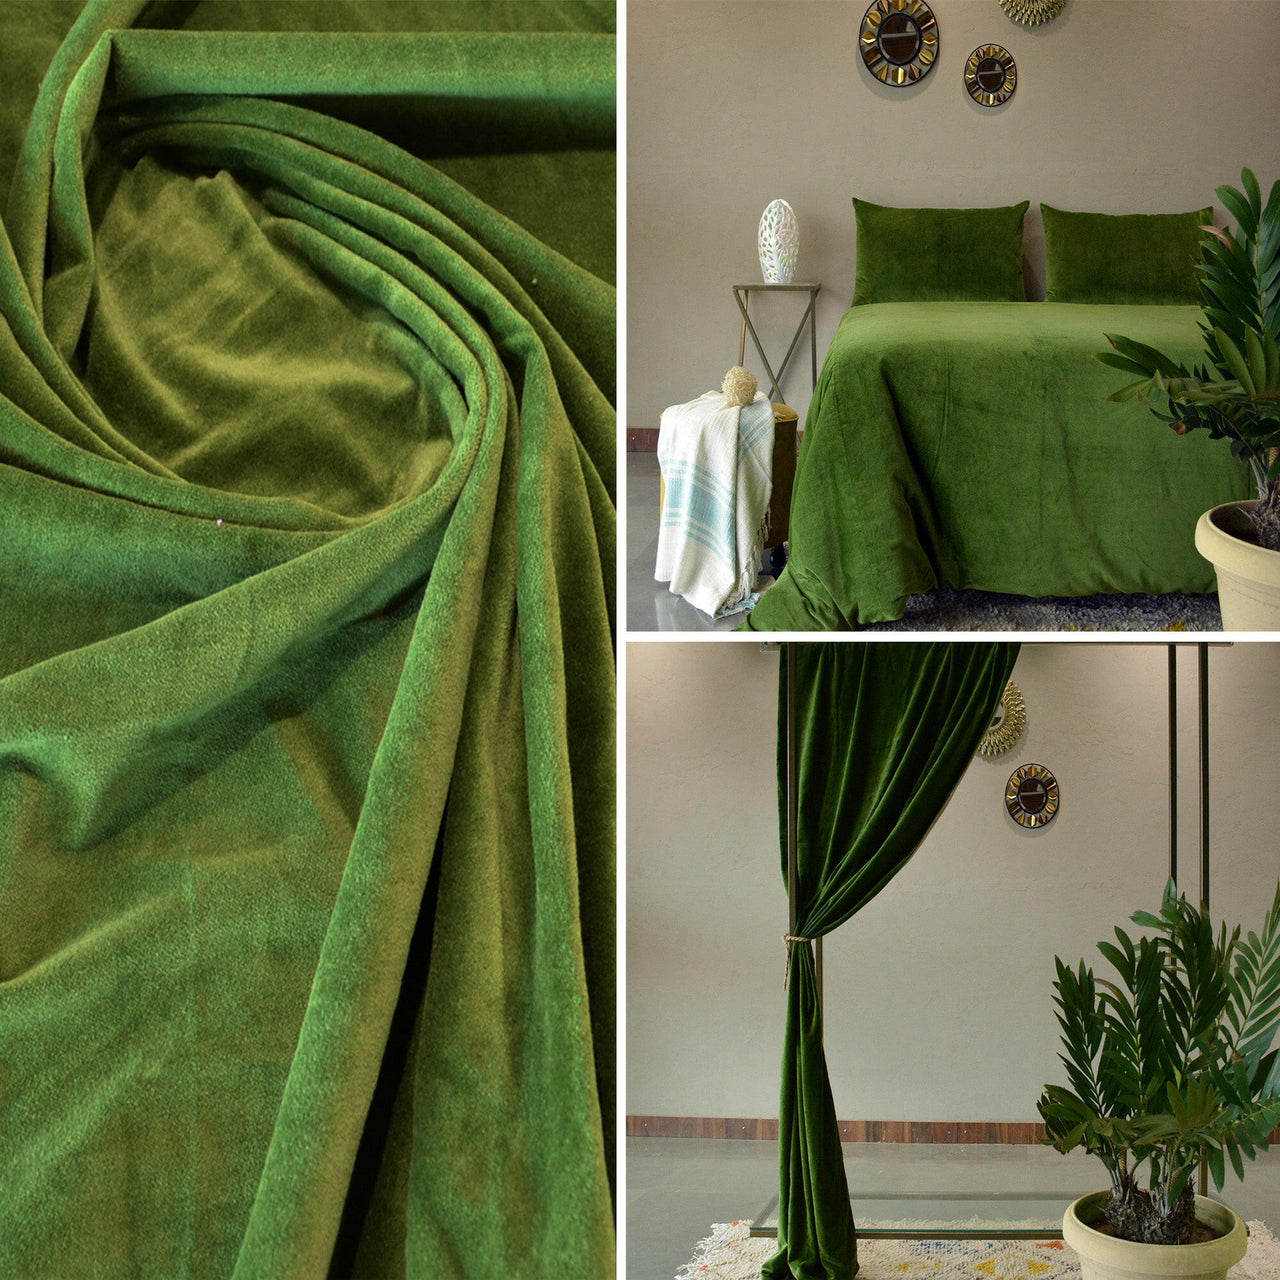 Luxury Moss green cotton Velvet Fabric by the meter.